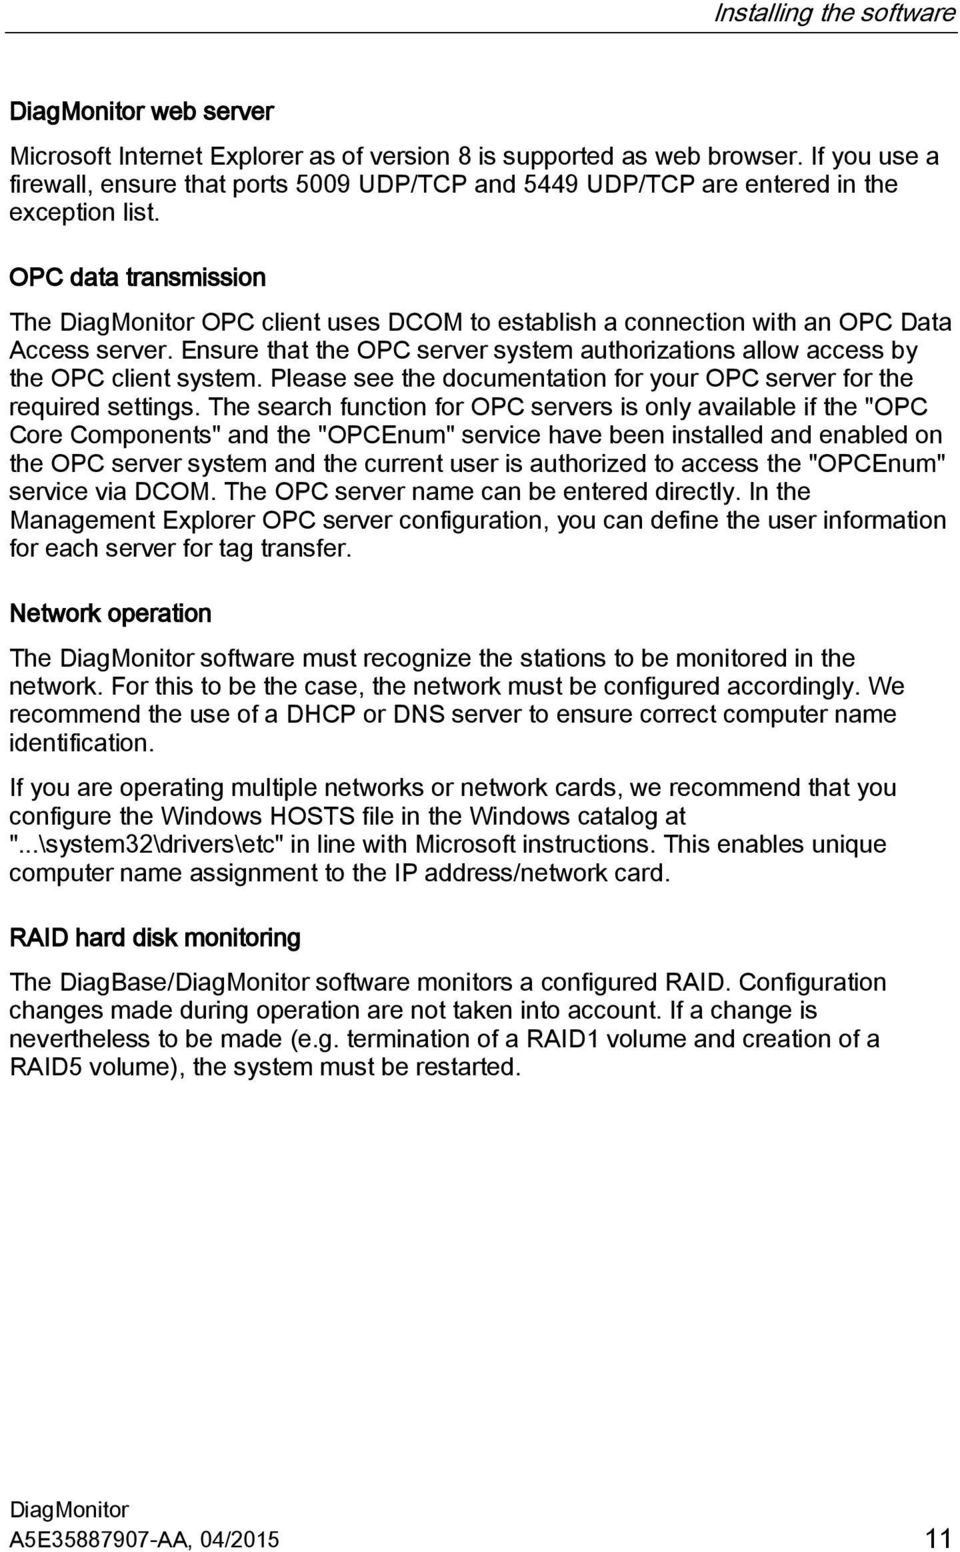 OPC data transmission The OPC client uses DCOM to establish a connection with an OPC Data Access server. Ensure that the OPC server system authorizations allow access by the OPC client system.